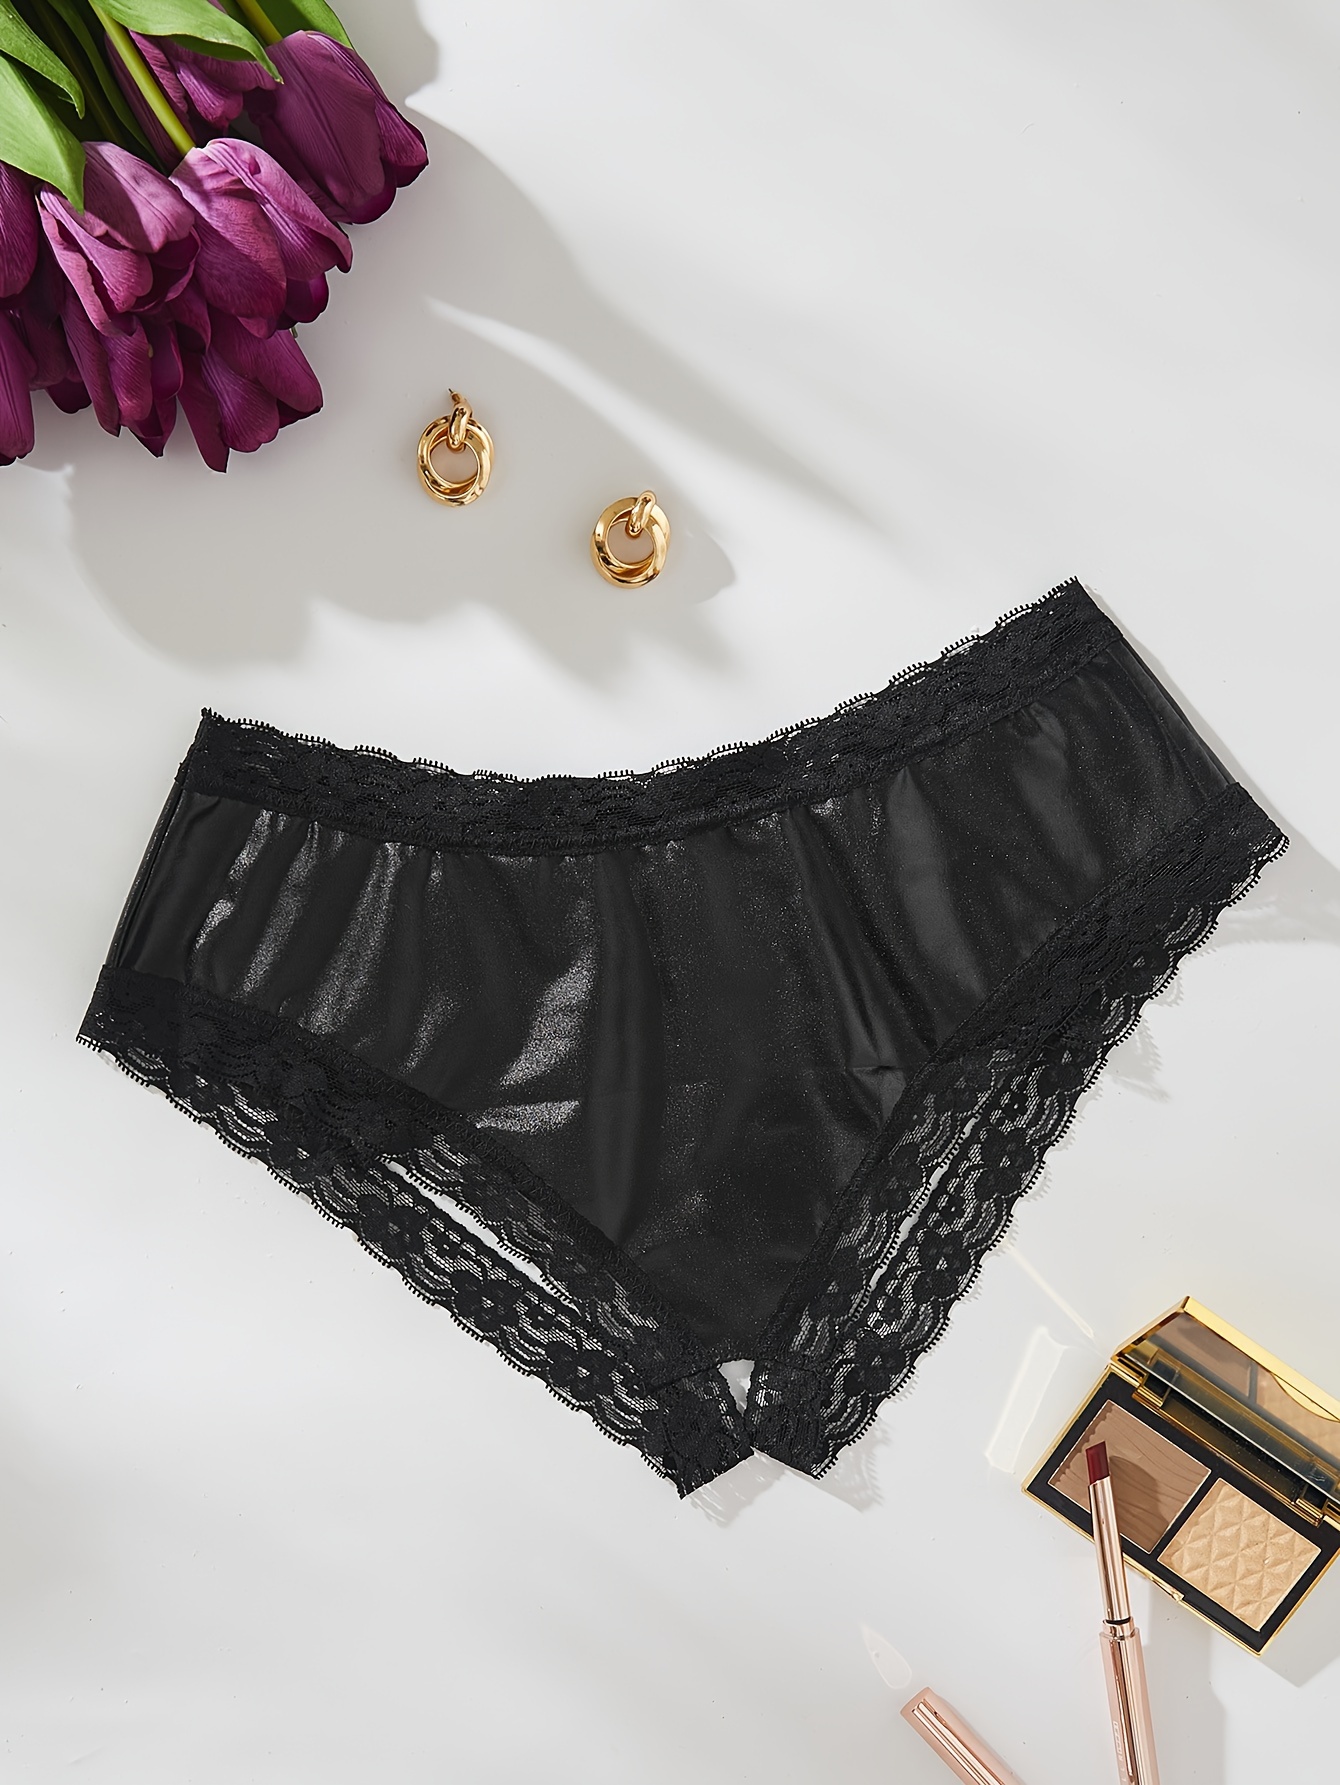 Patent Leather Knickers Low Waist Briefs Naughty Sexy - Temu